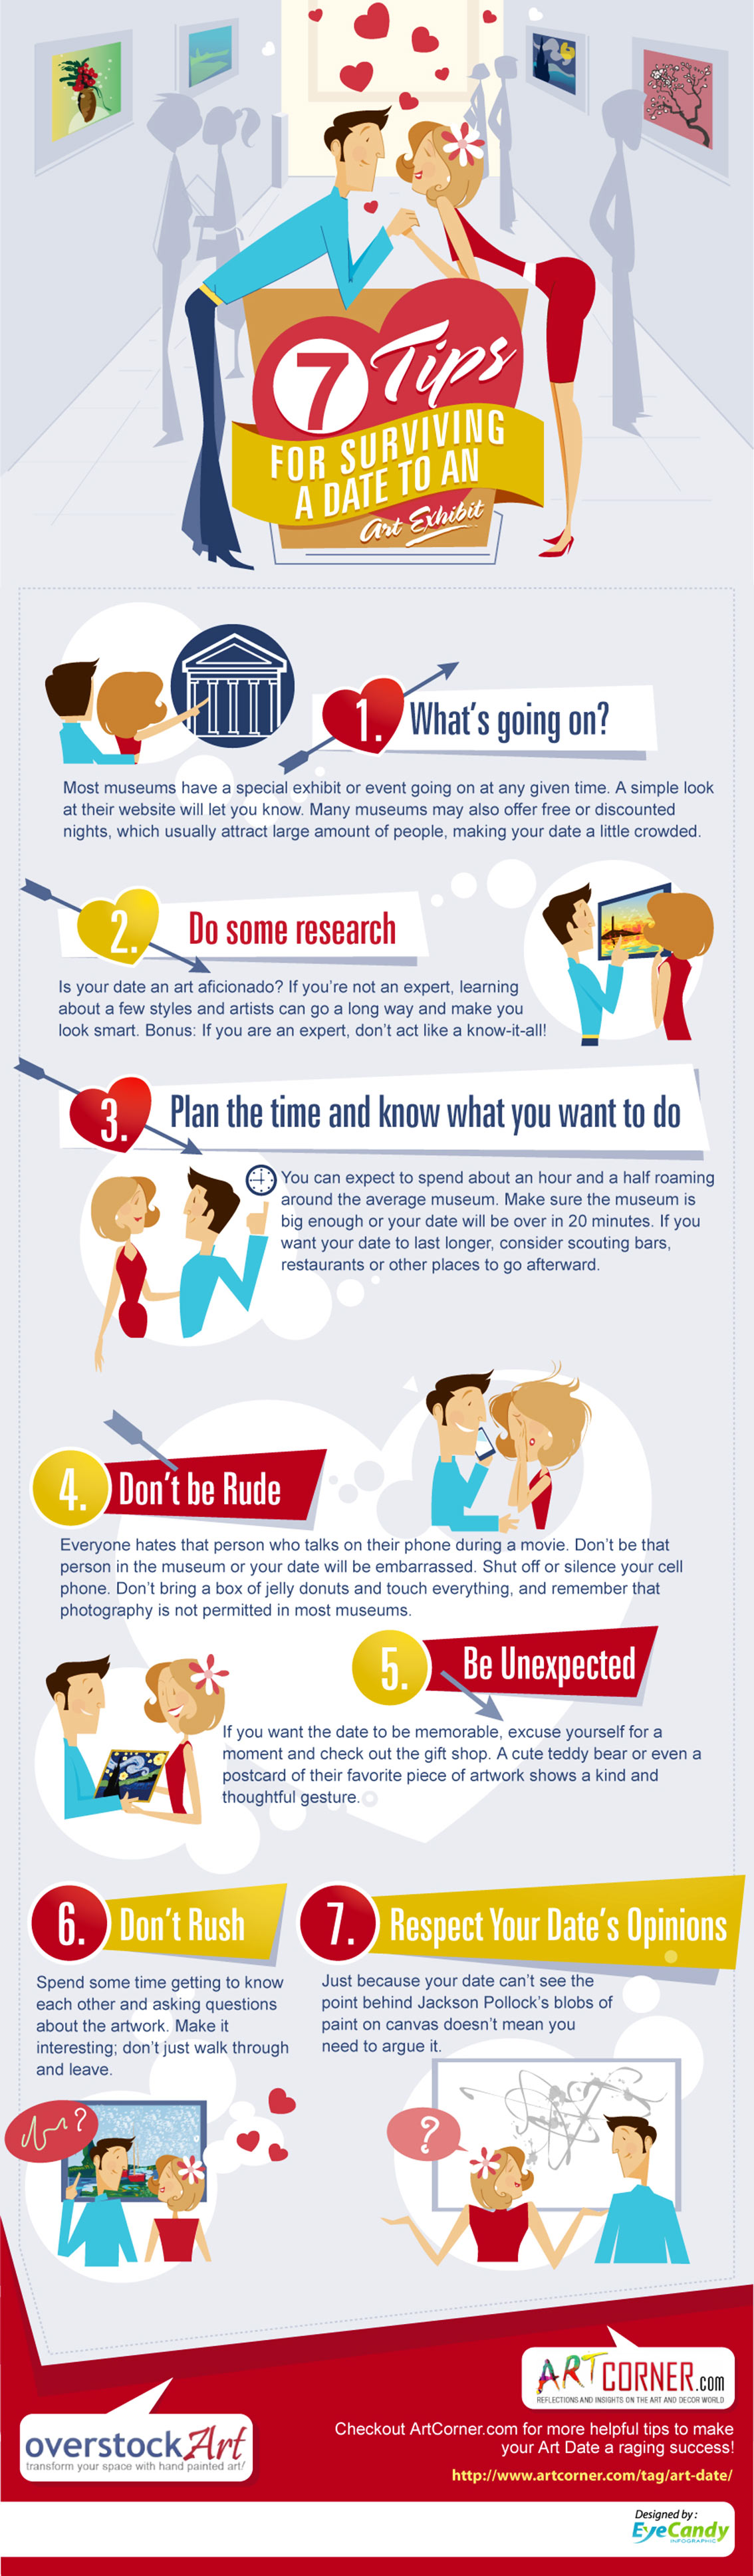 7 Tips for Surviving a Date to an Art Exhibit - Dating Infographic